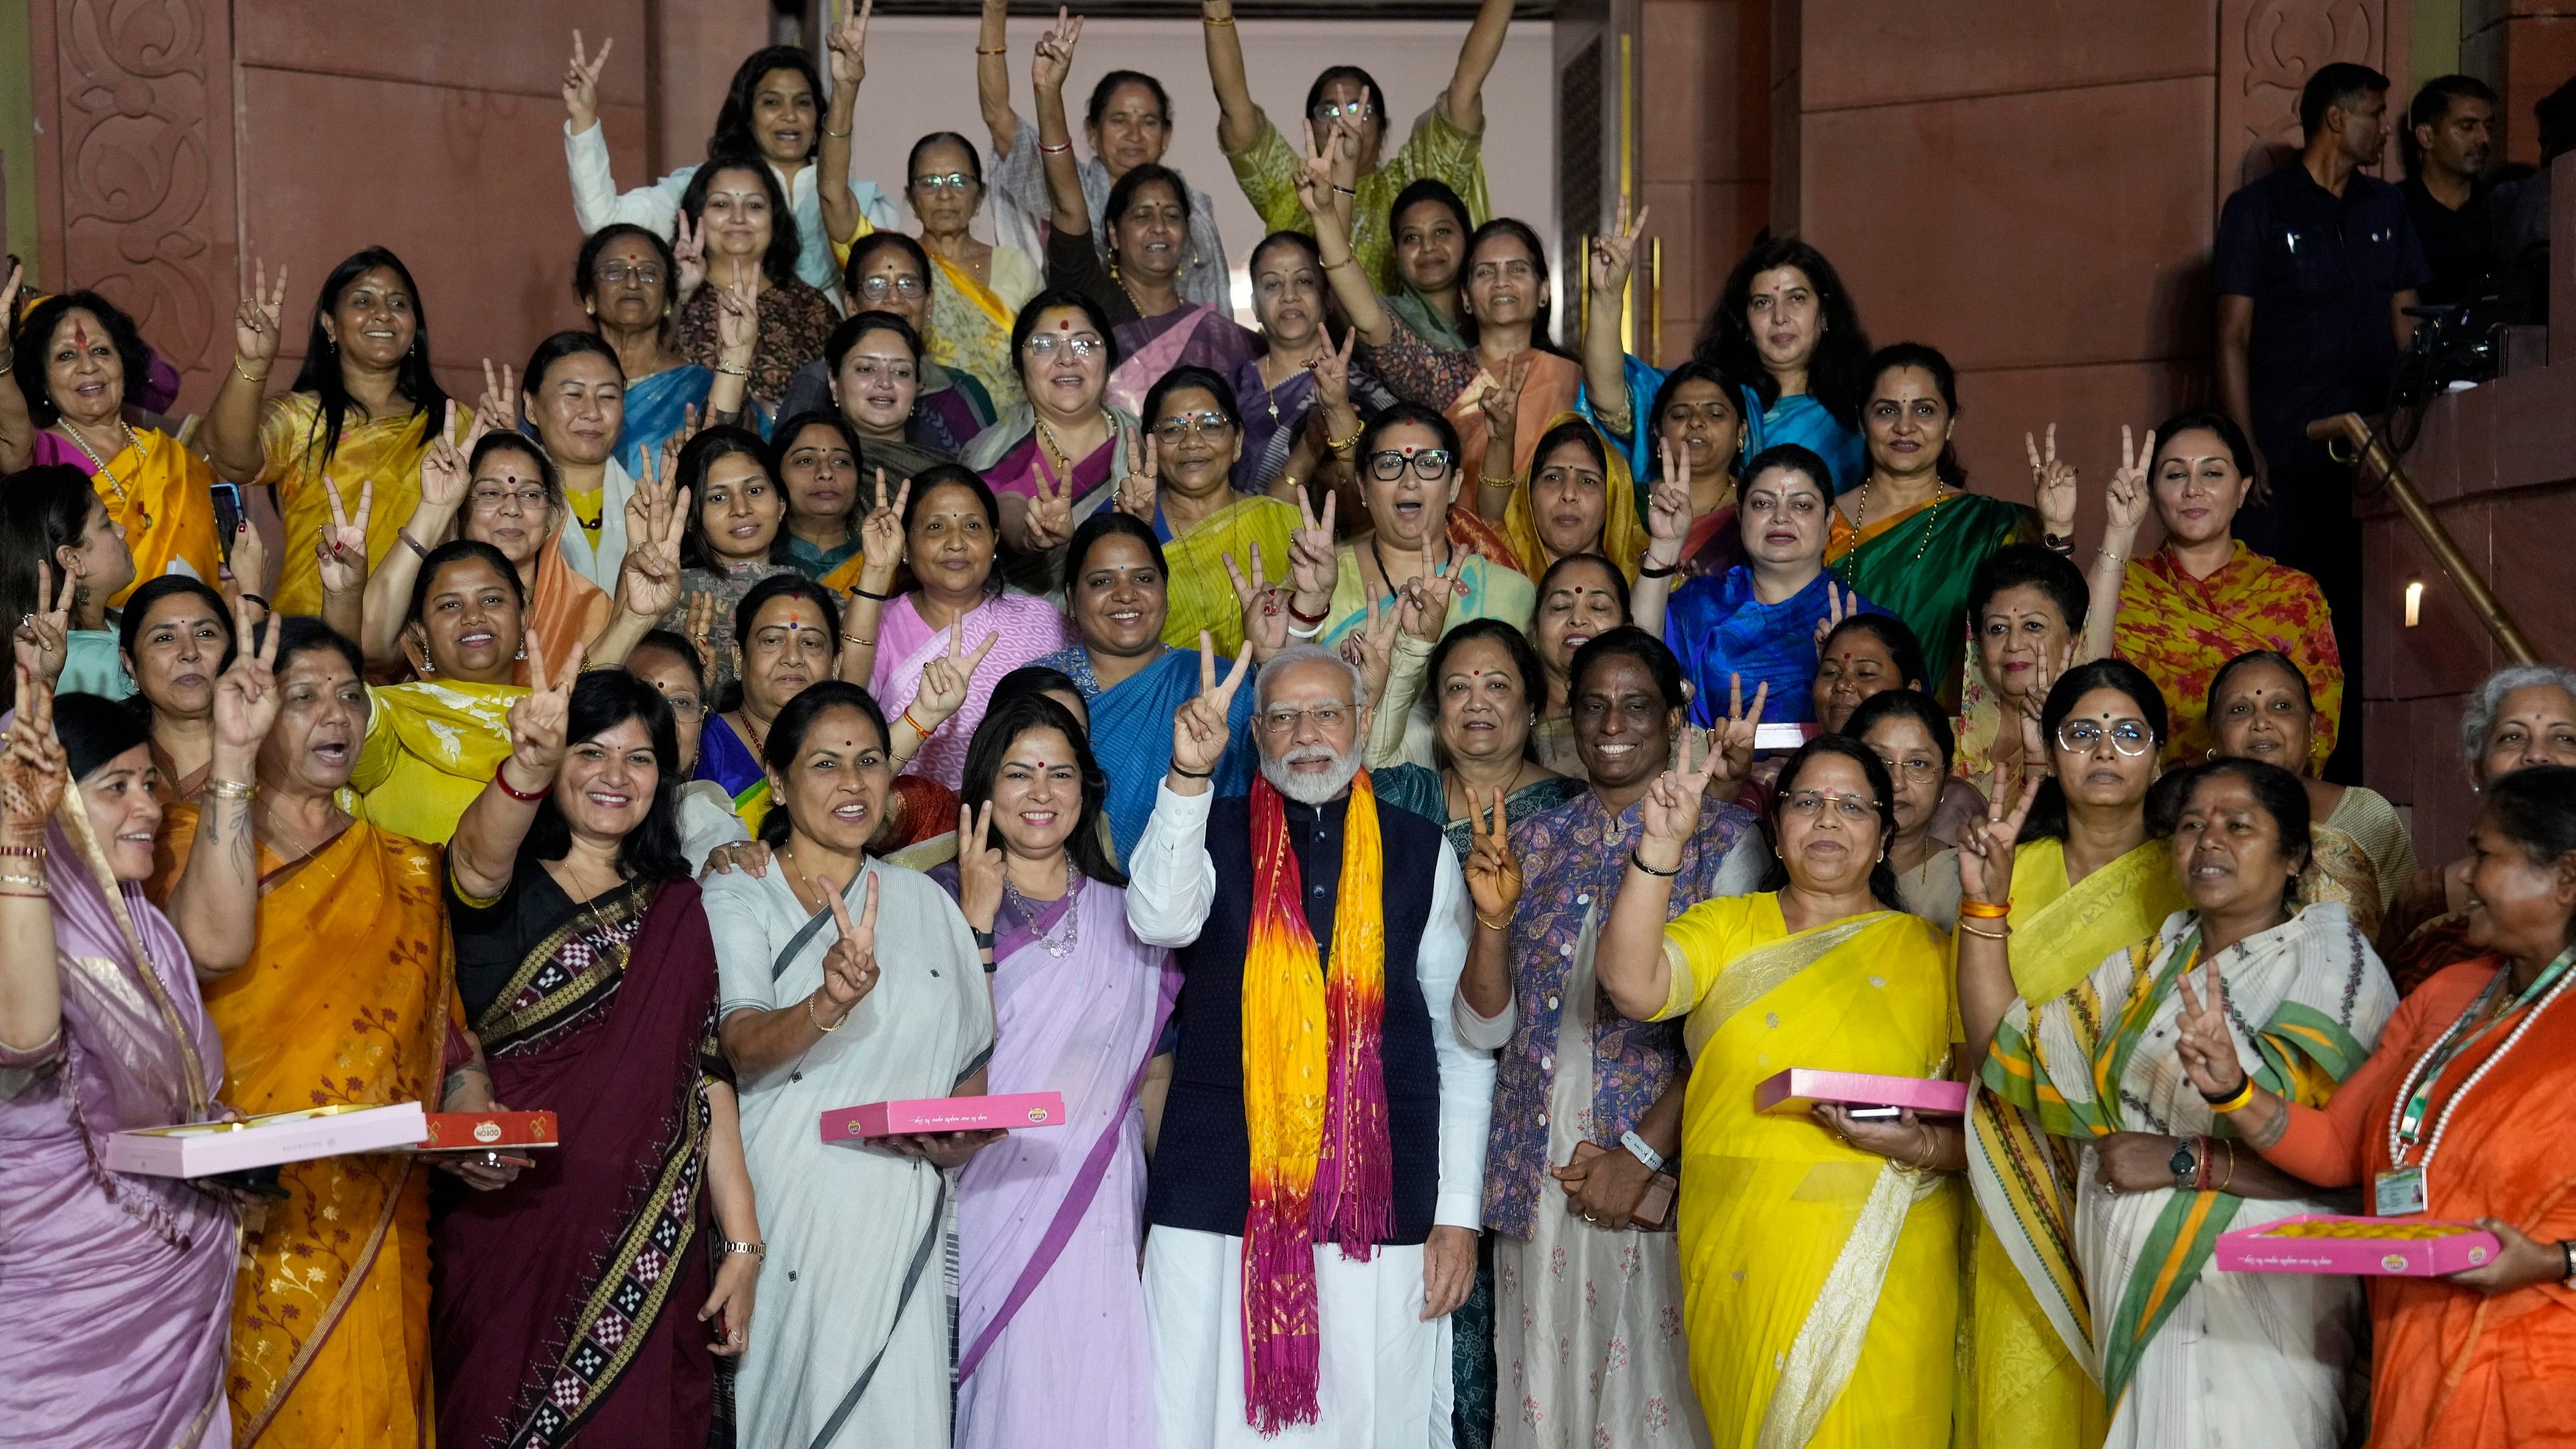 <div class="paragraphs"><p>Women MPs celebrate with PM Modi&nbsp;after Women's Reservation Bill passes in Rajya Sabha.</p></div>